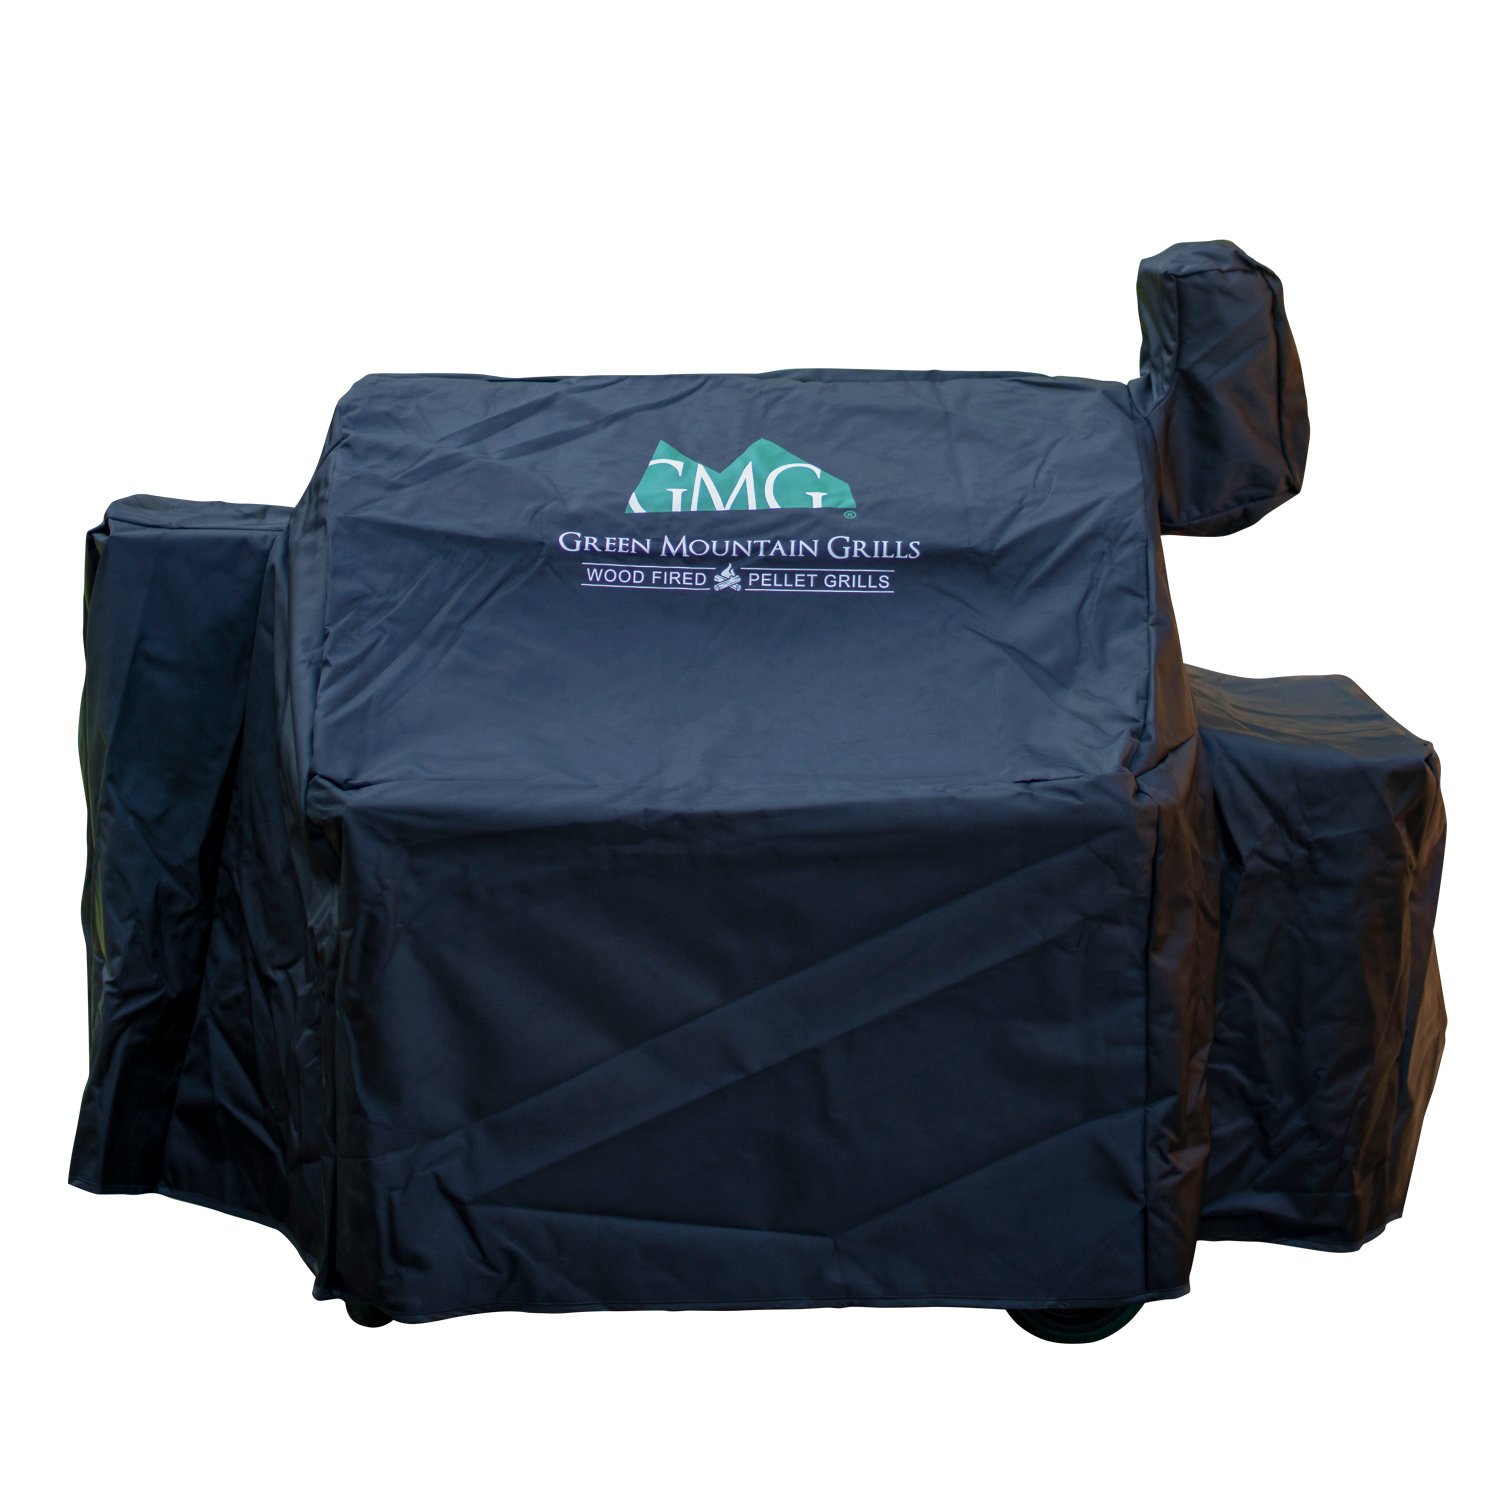 GMG LONG GRILL COVER FOR PEAK AND JIM BOWIE PRIME GRILLS